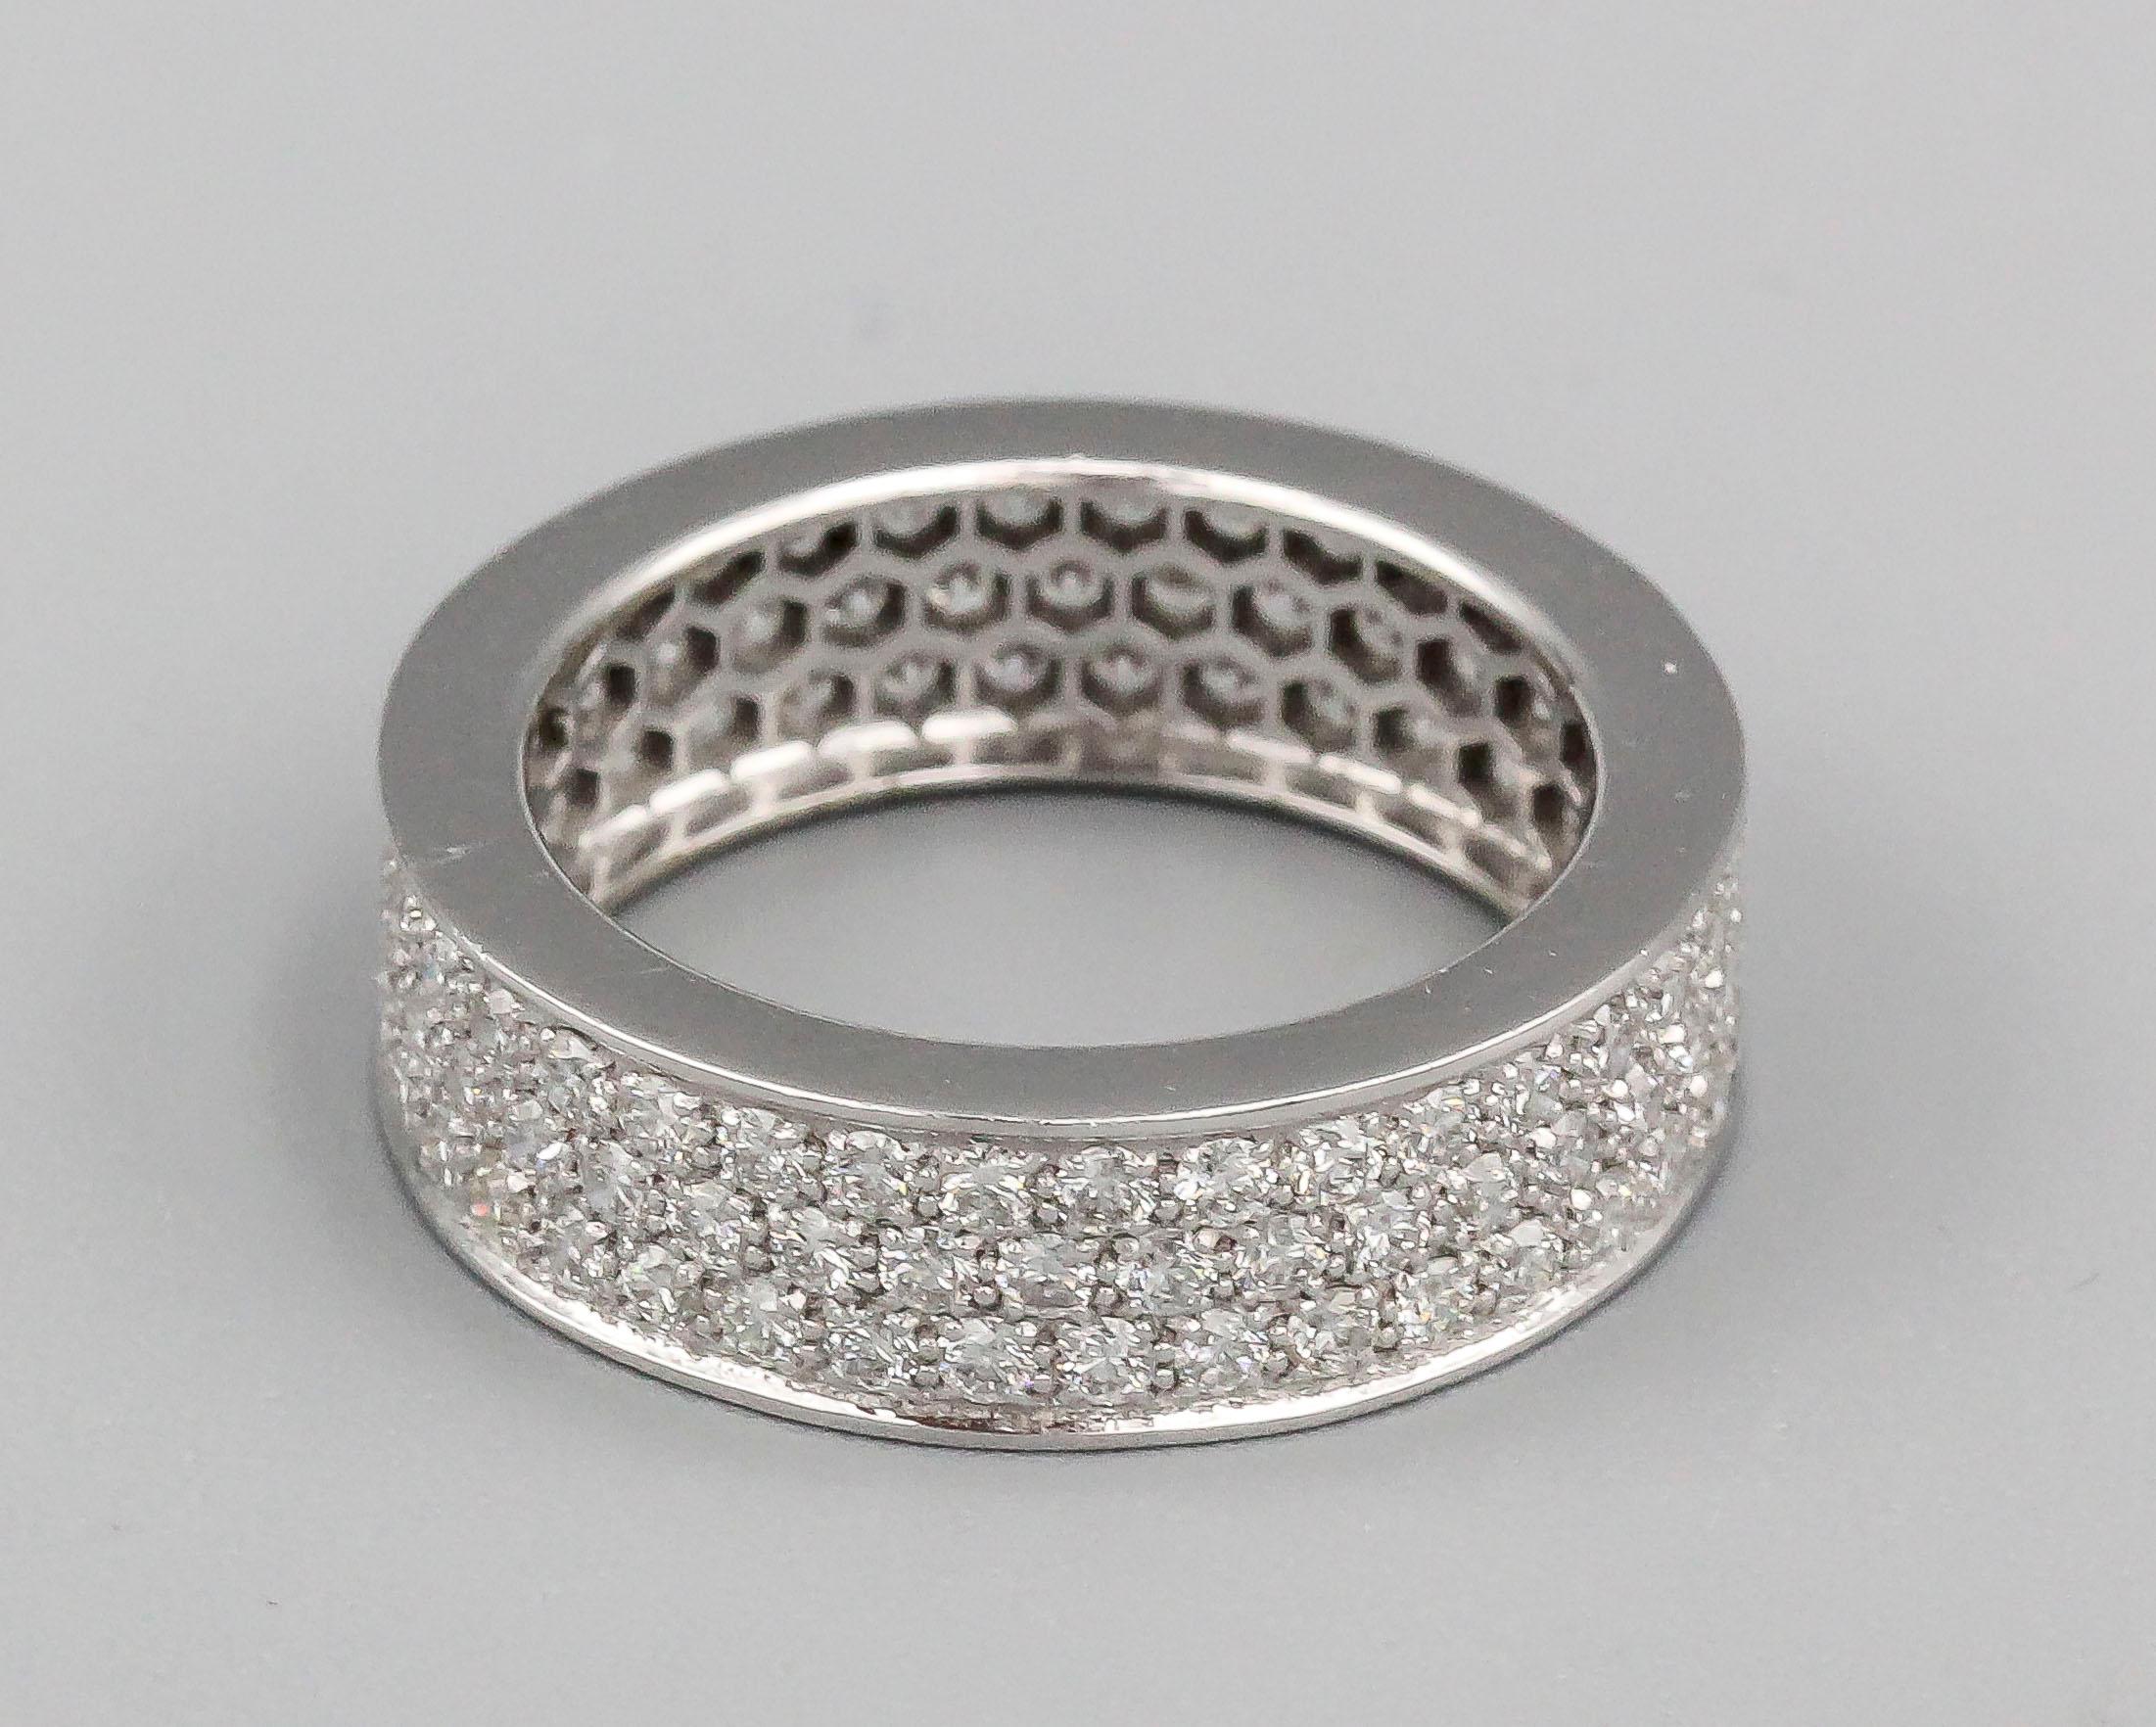 Fine diamond and 18k white gold band of French origin and contemporary make.  Features approx. 2.50 carats of round brilliant cut diamonds of approx. G-H color and VS approx. clarity. Size 6.25 and approx. 6 mm wide.

Hallmarks: Maker's mark, French